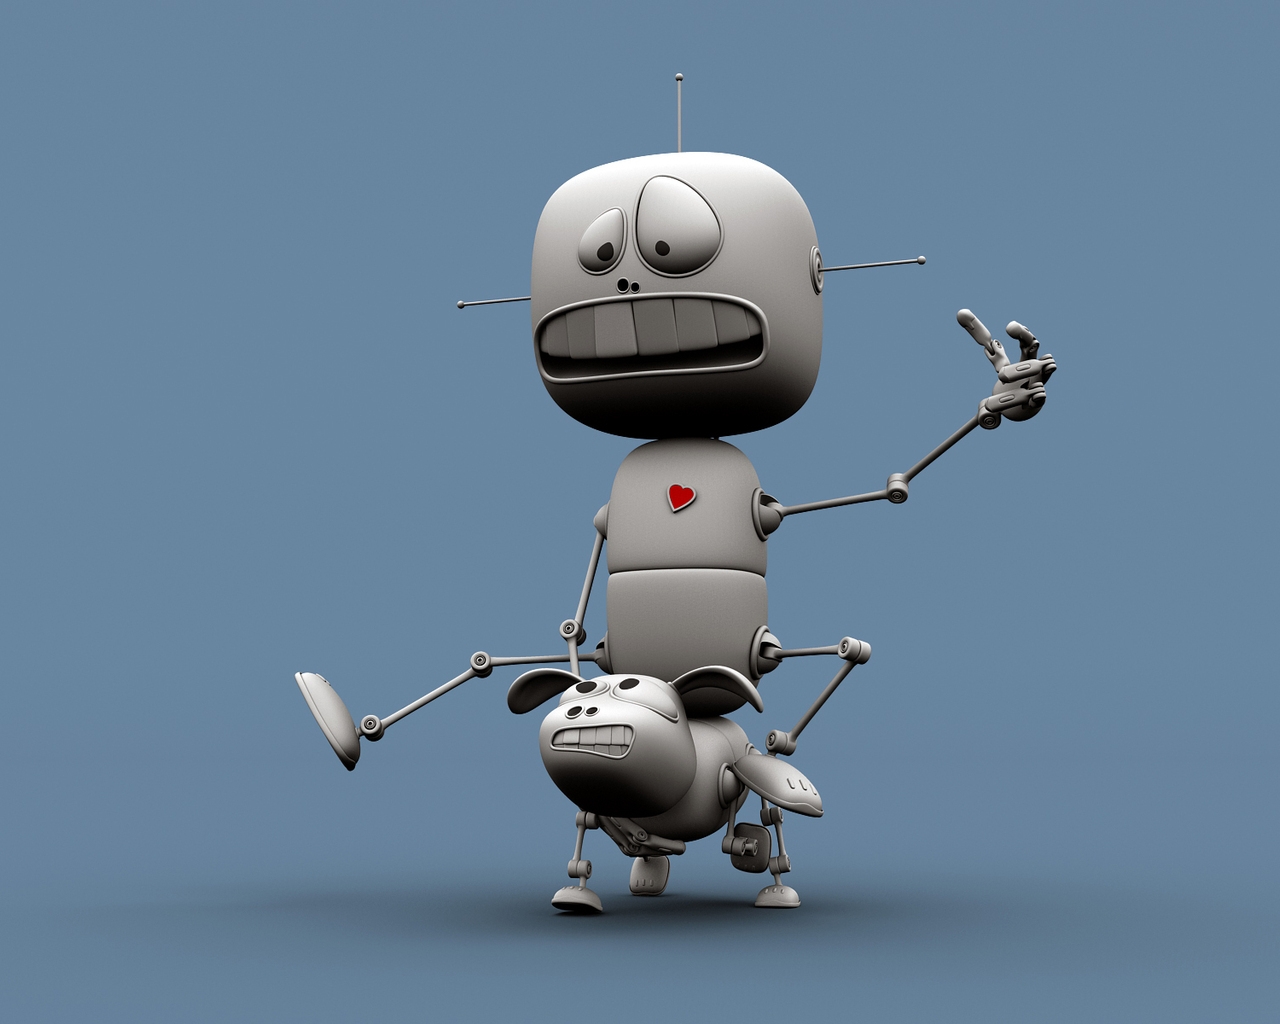 Some Funny Robots for 1280 x 1024 resolution